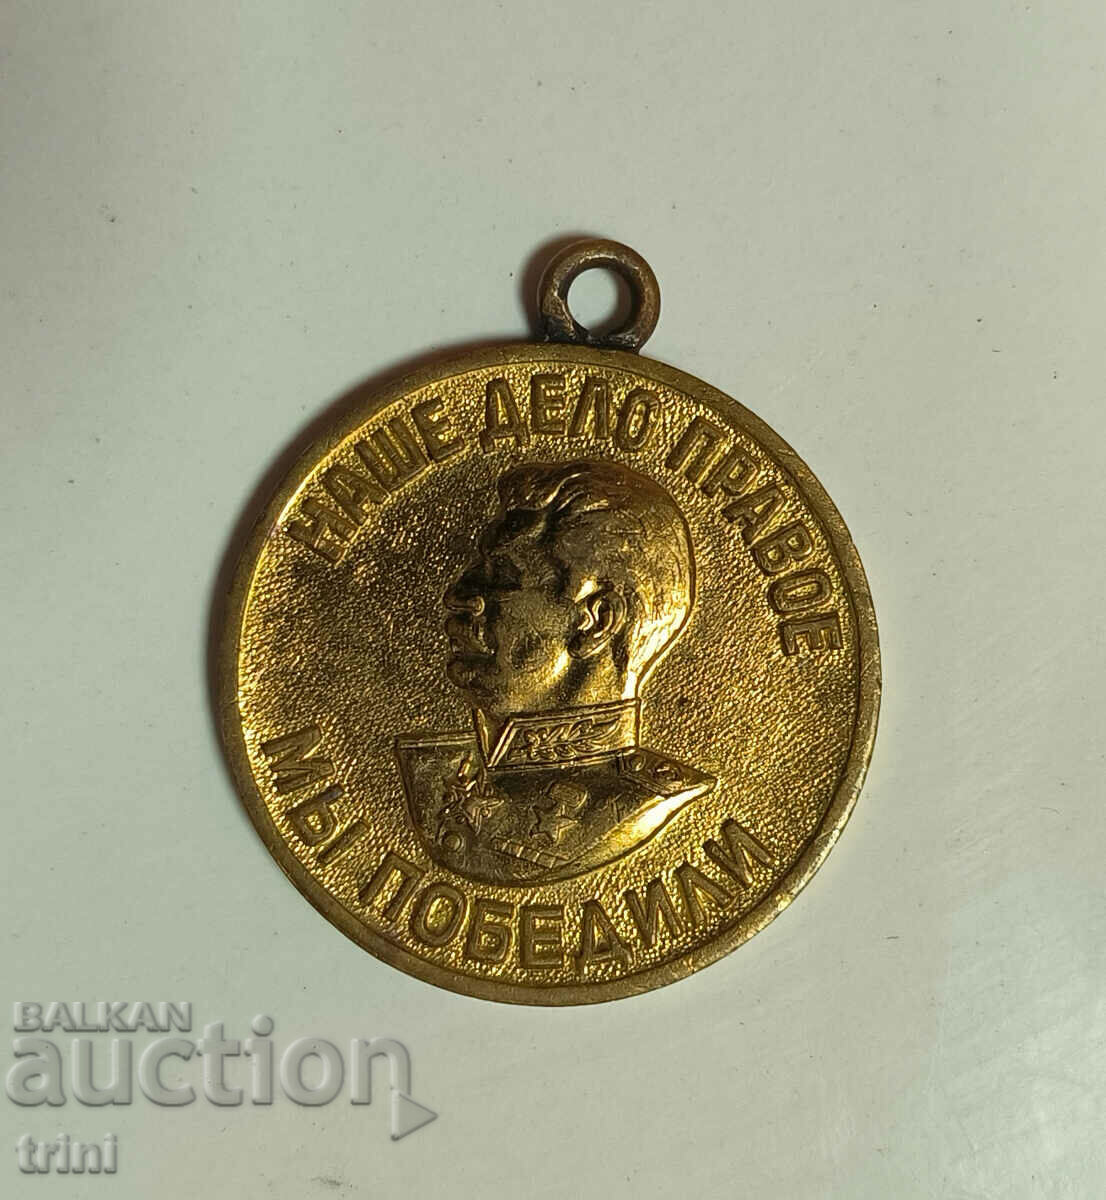 WW2 Victory over Germany Medal Our Righteousness